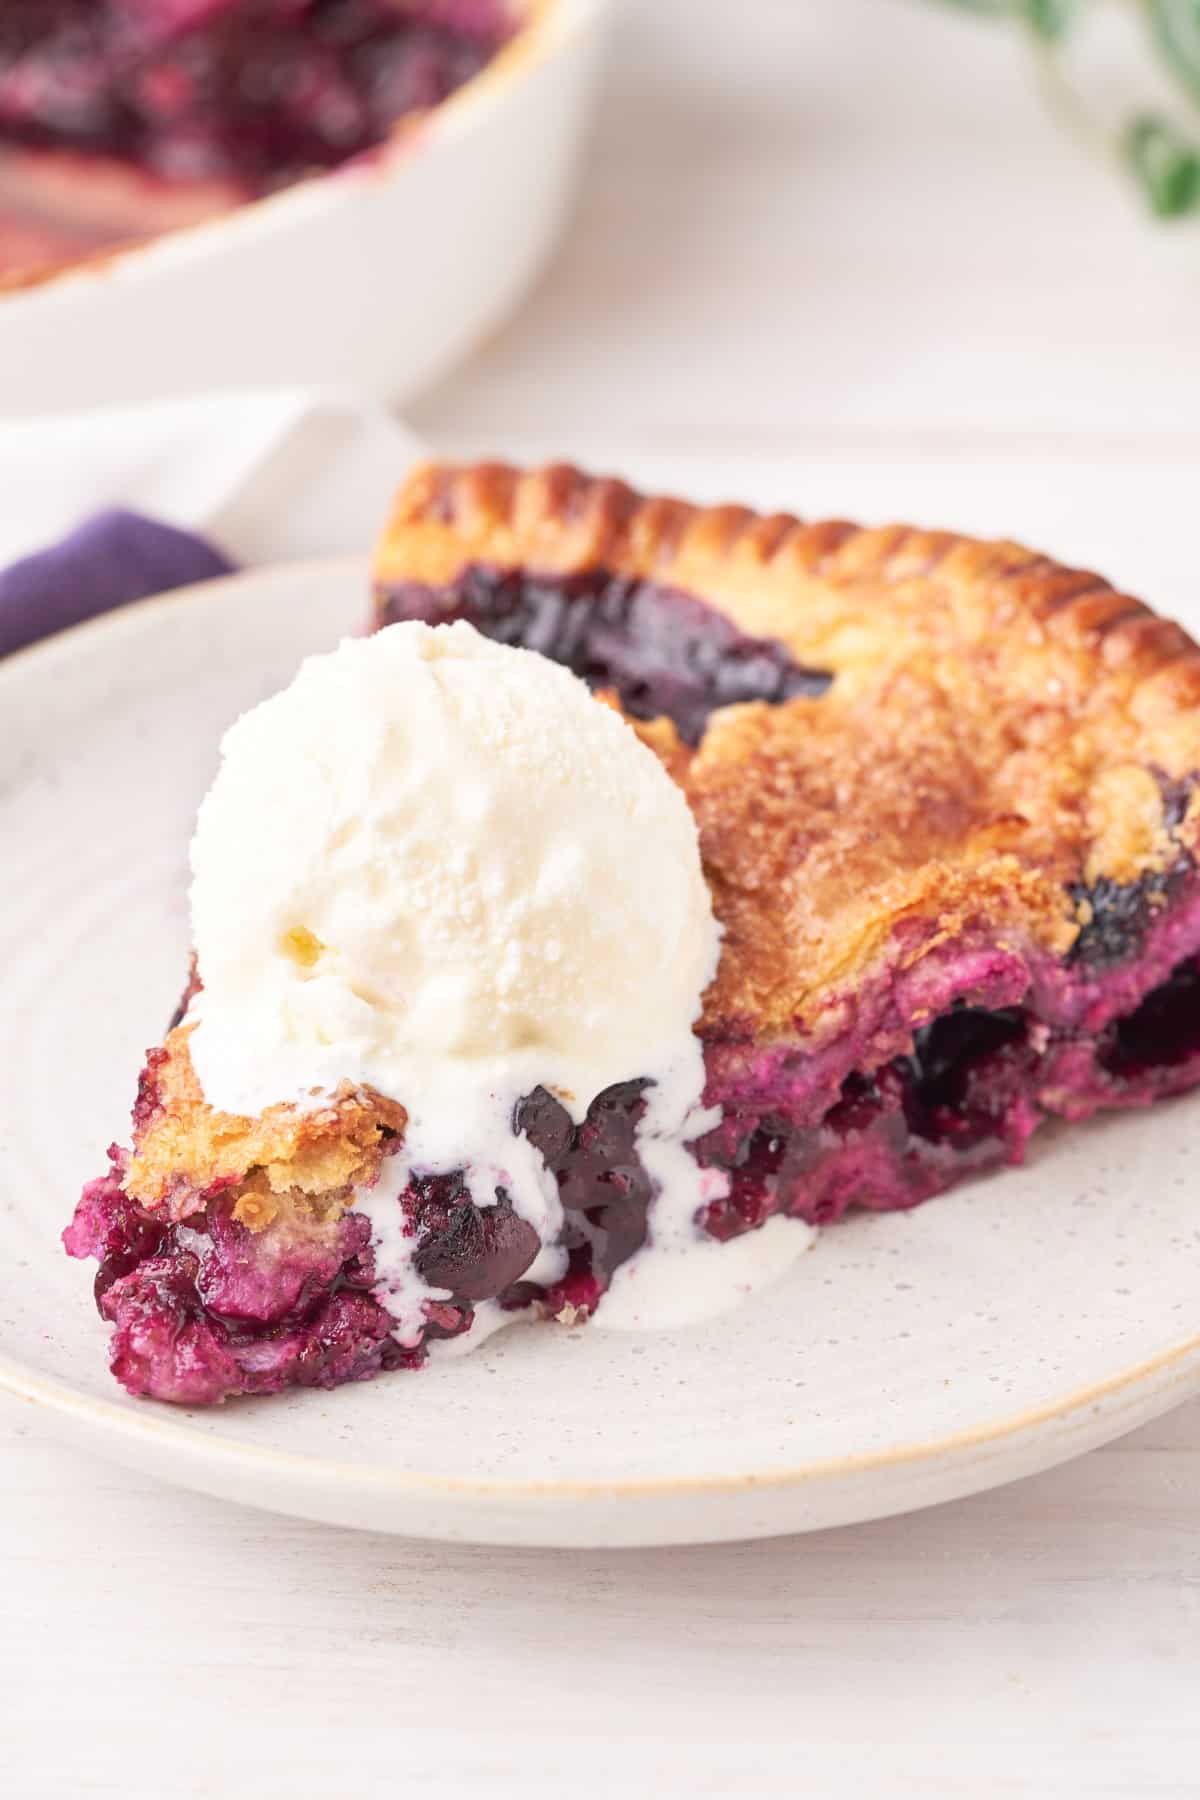 Blueberry Pie and ice cream on a white plate